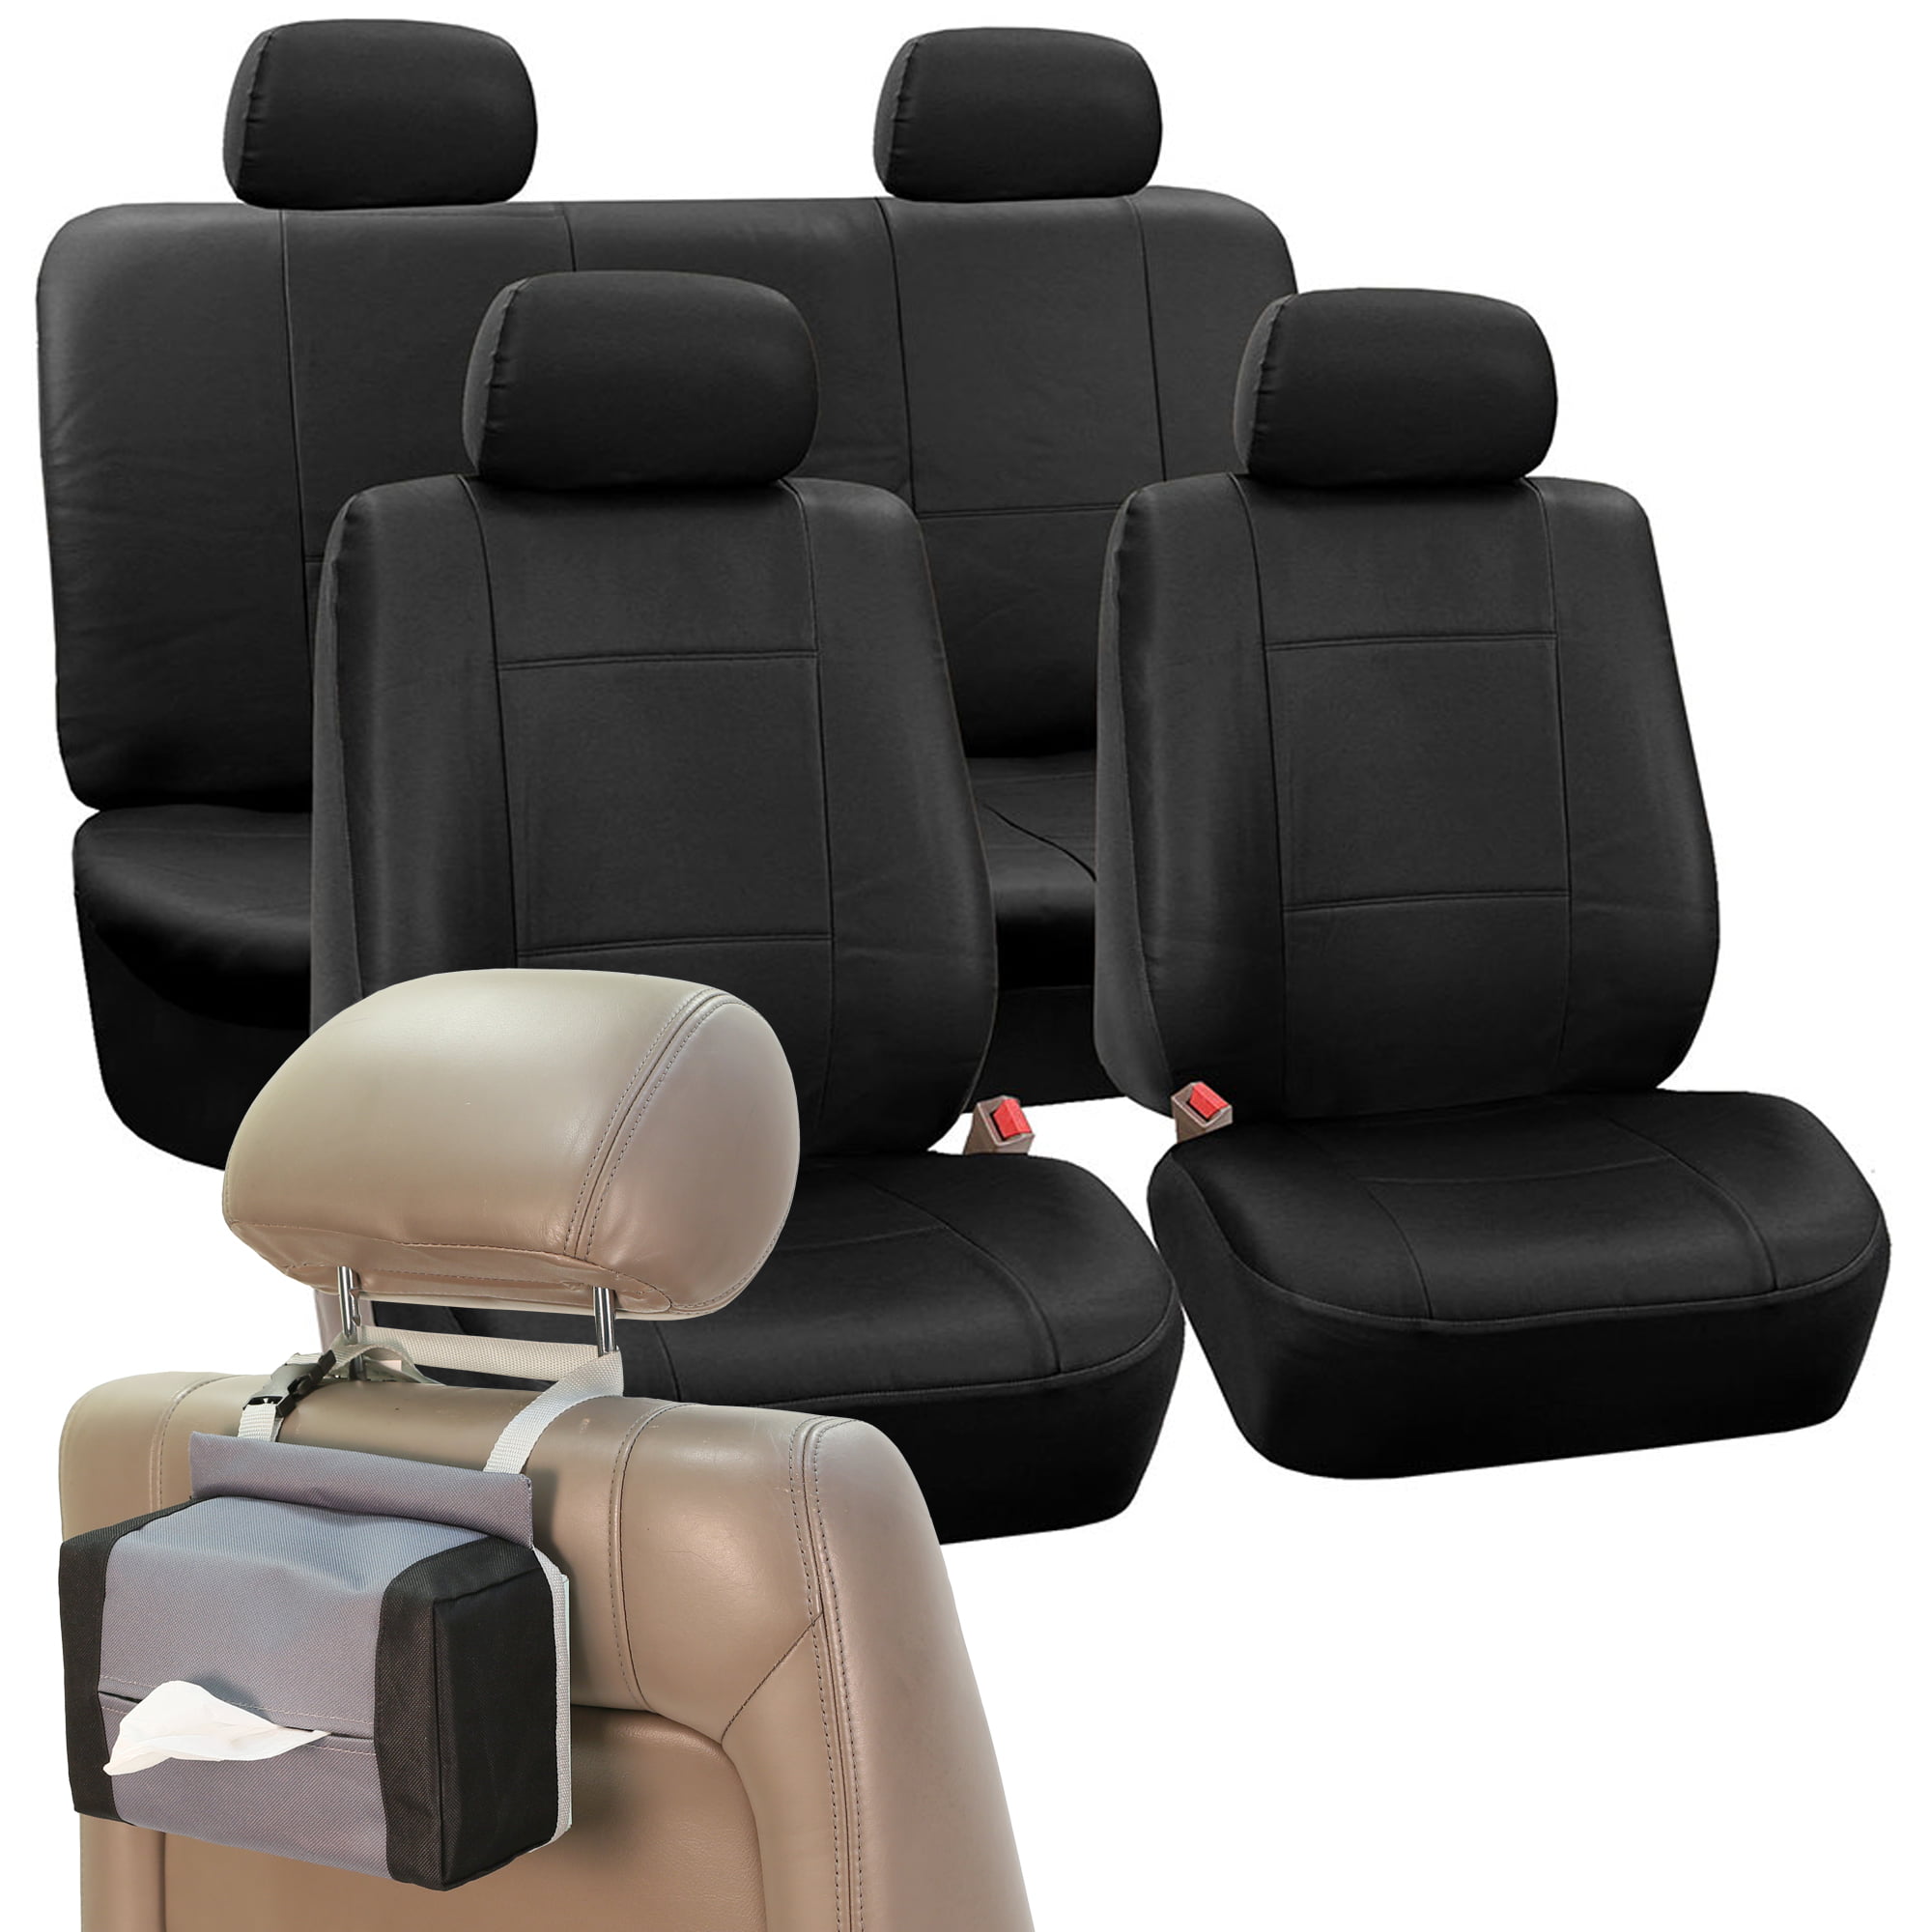 Pu Leather Car Seat Covers For Auto Pu Leather Full Seat Cover Set With Tissue Dispenser Black